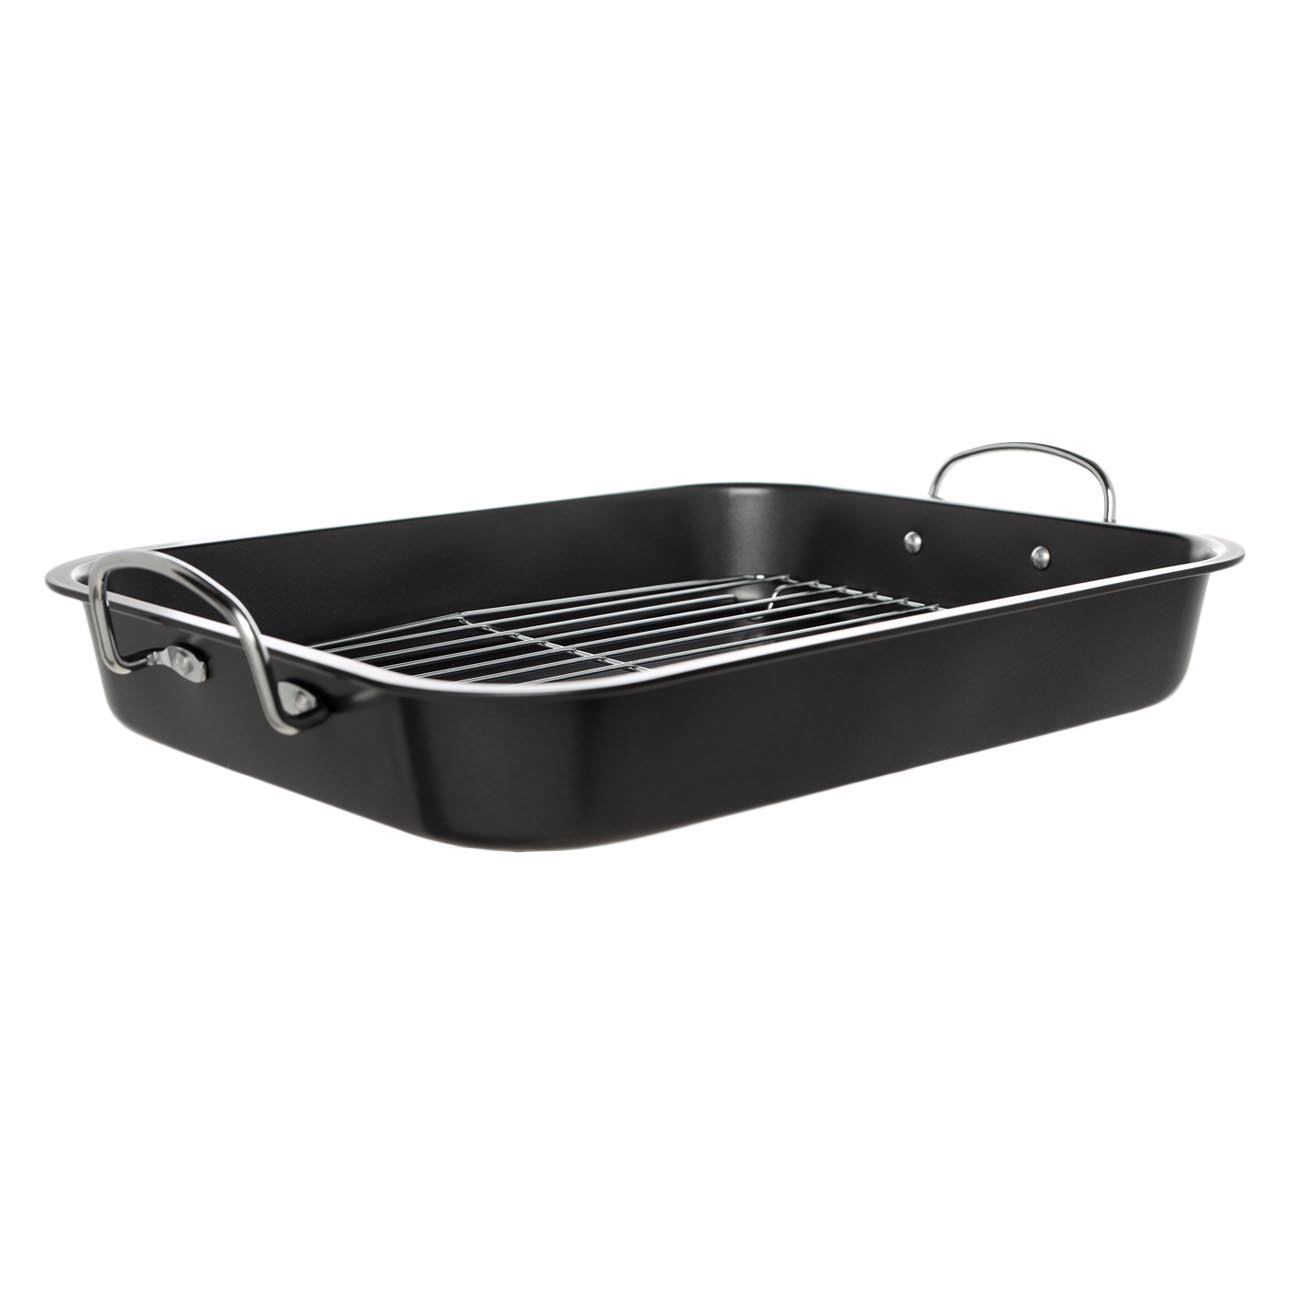 Baking tray, 37x29 cm, with handles and grill, coated, steel, black, BBQ изображение № 3